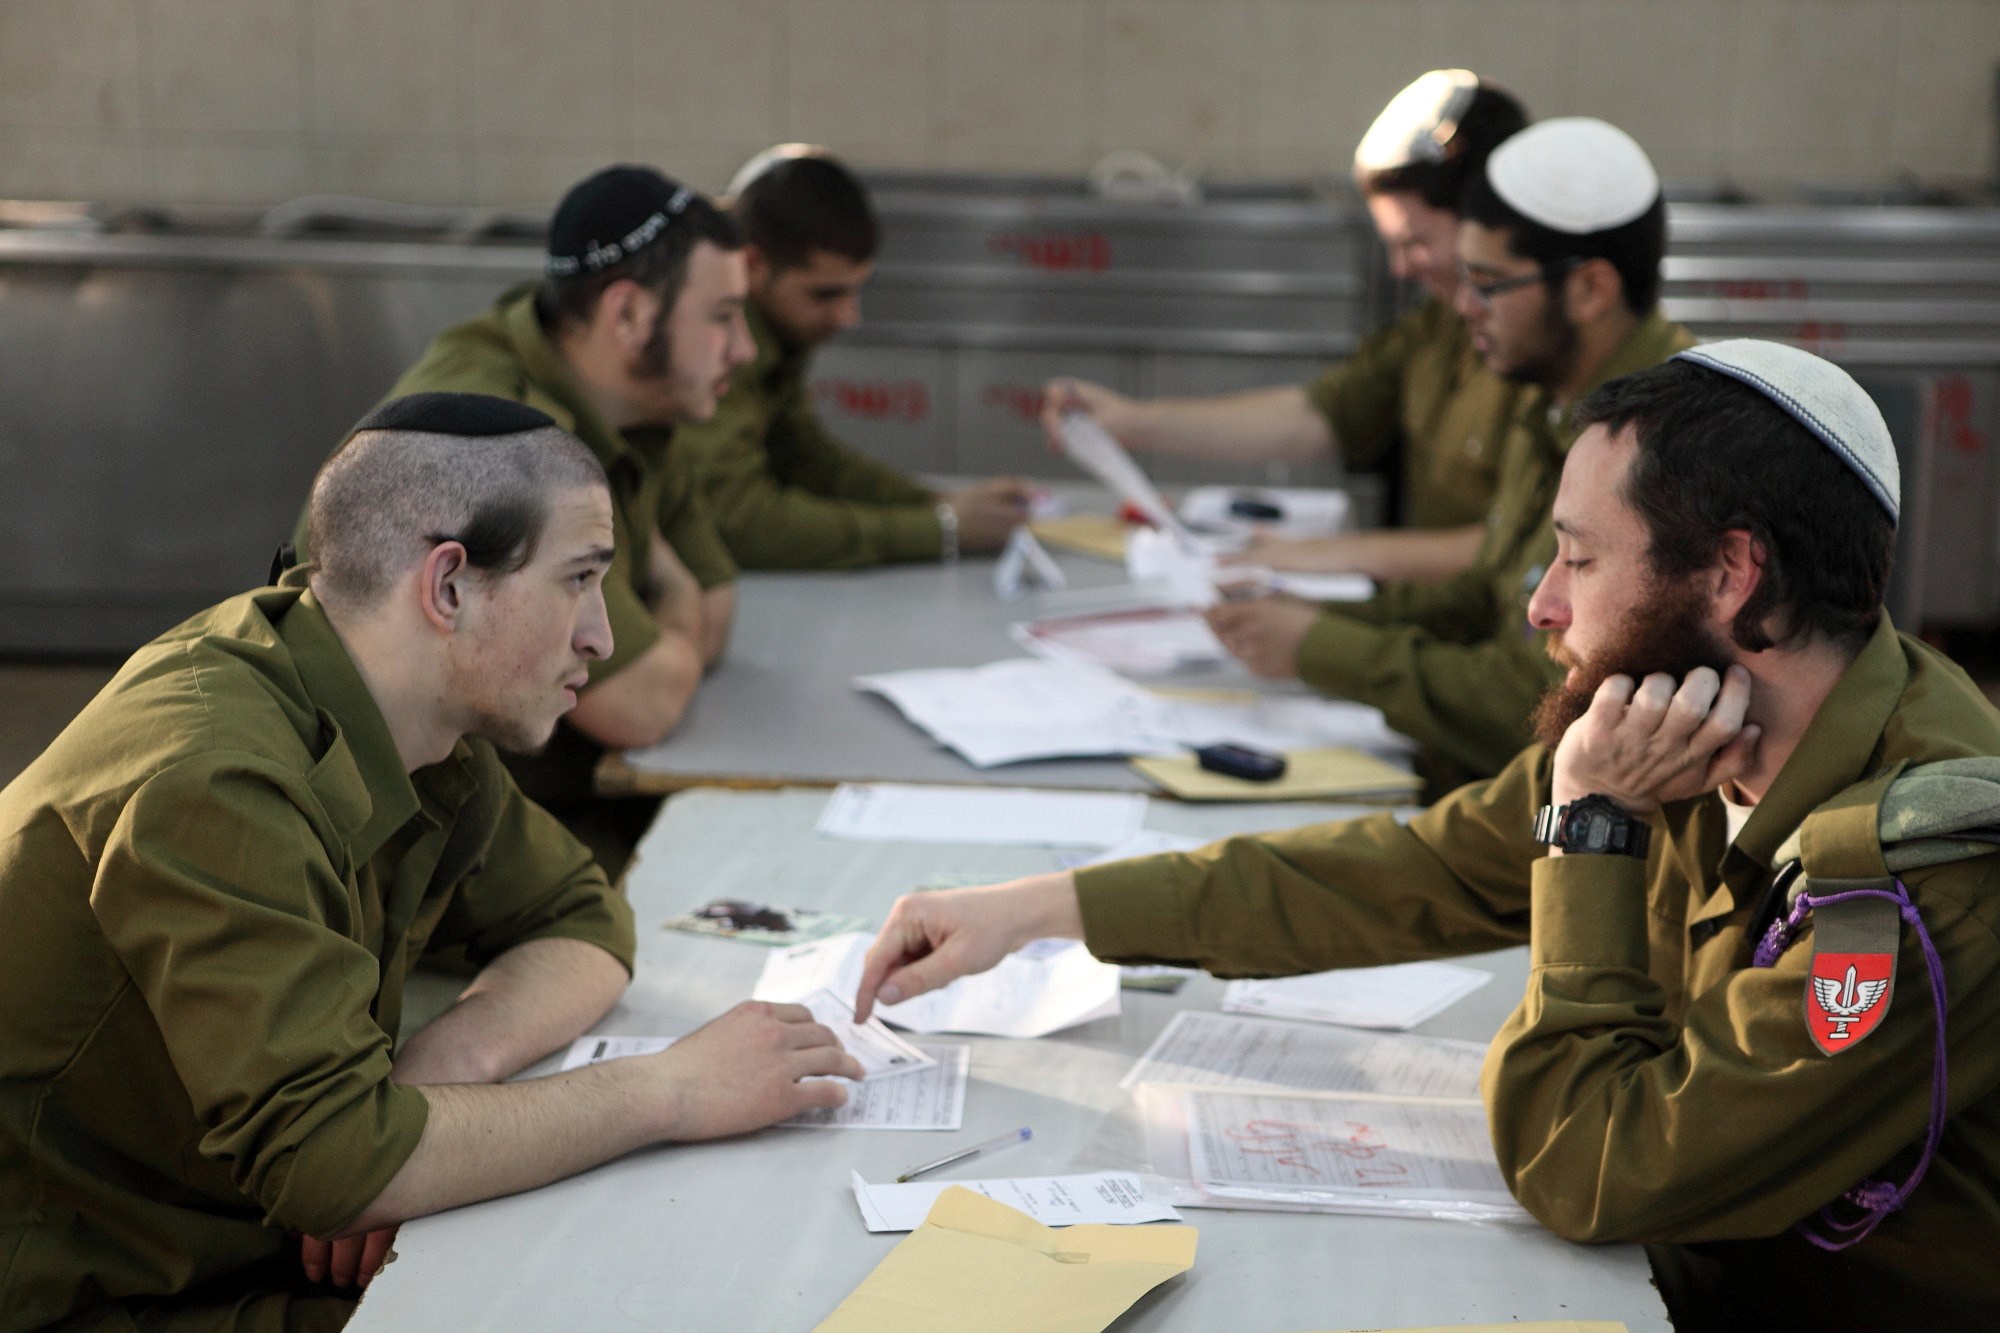 A New Social Contract with the IDF? On the Benefits of Waiting to Decide